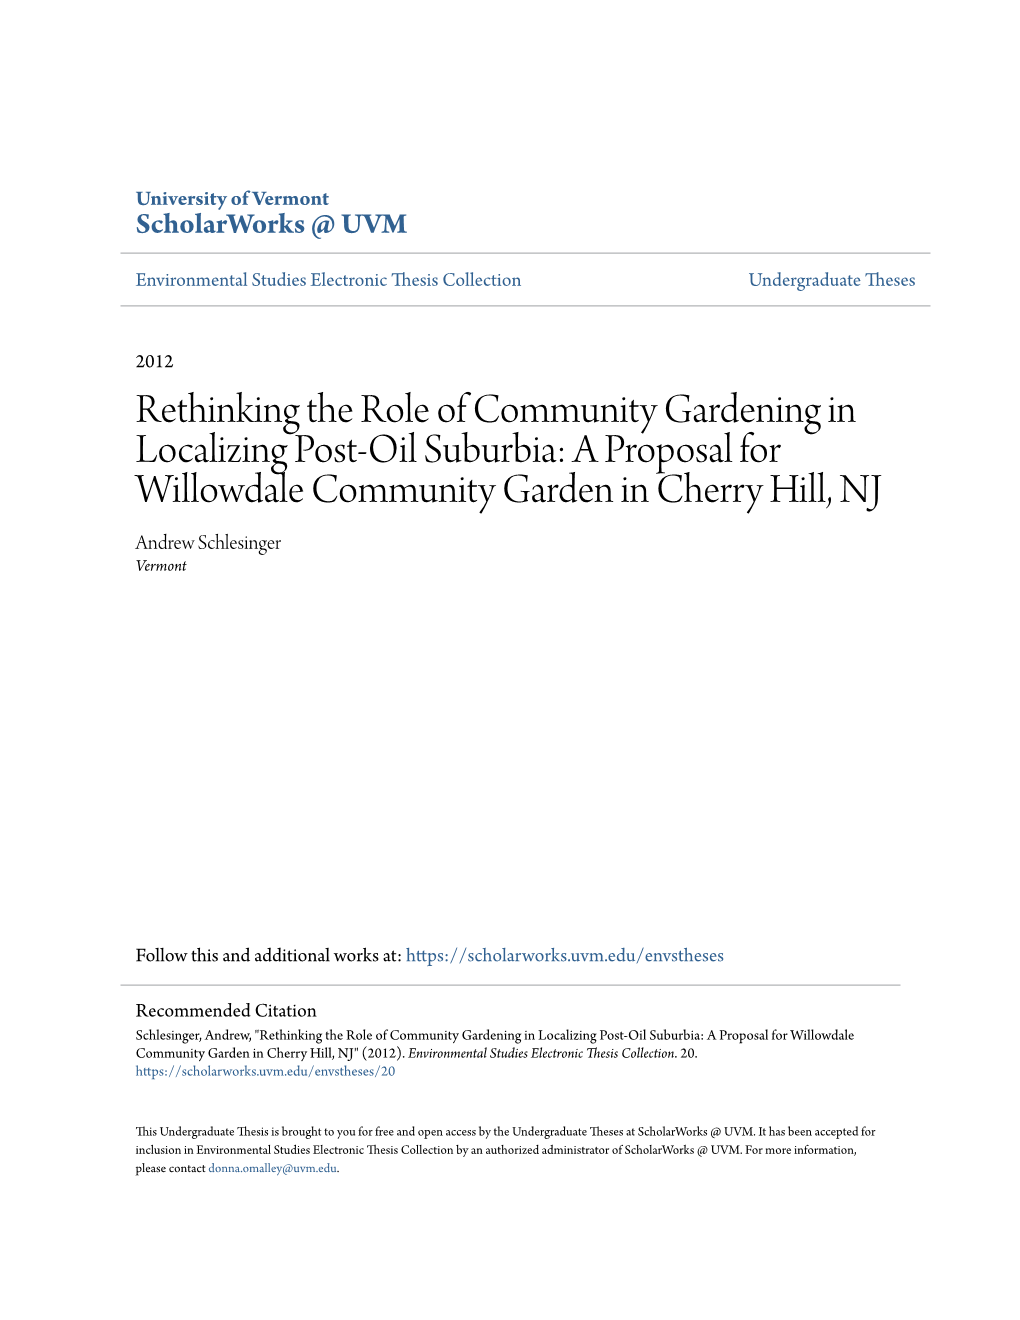 Rethinking the Role of Community Gardening in Localizing Post-Oil Suburbia: a Proposal for Willowdale Community Garden in Cherry Hill, NJ Andrew Schlesinger Vermont